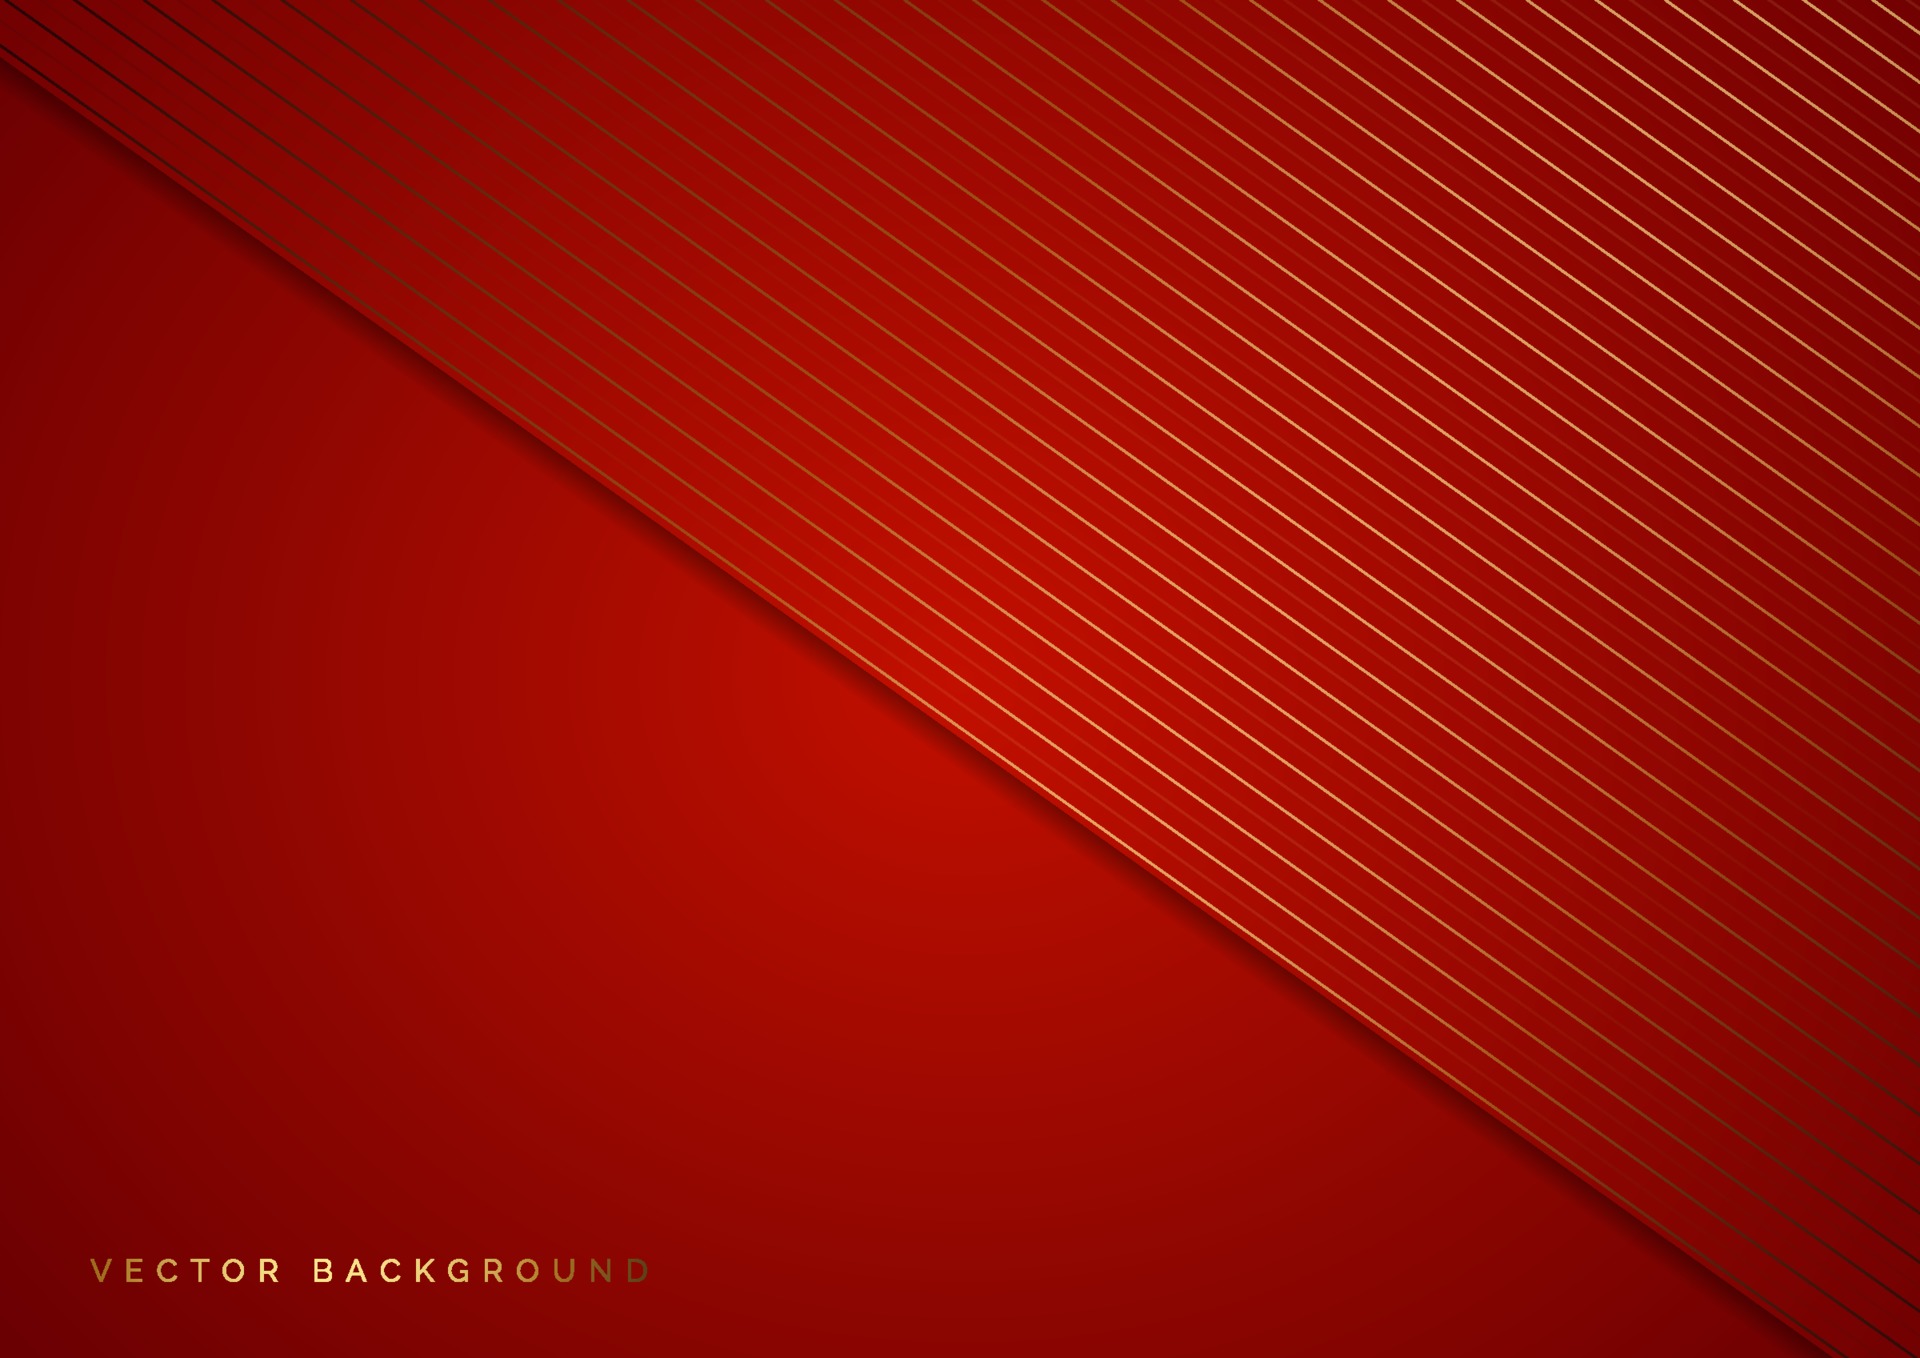 Explore our gallery of Luxury background red free for your personal and commercial use